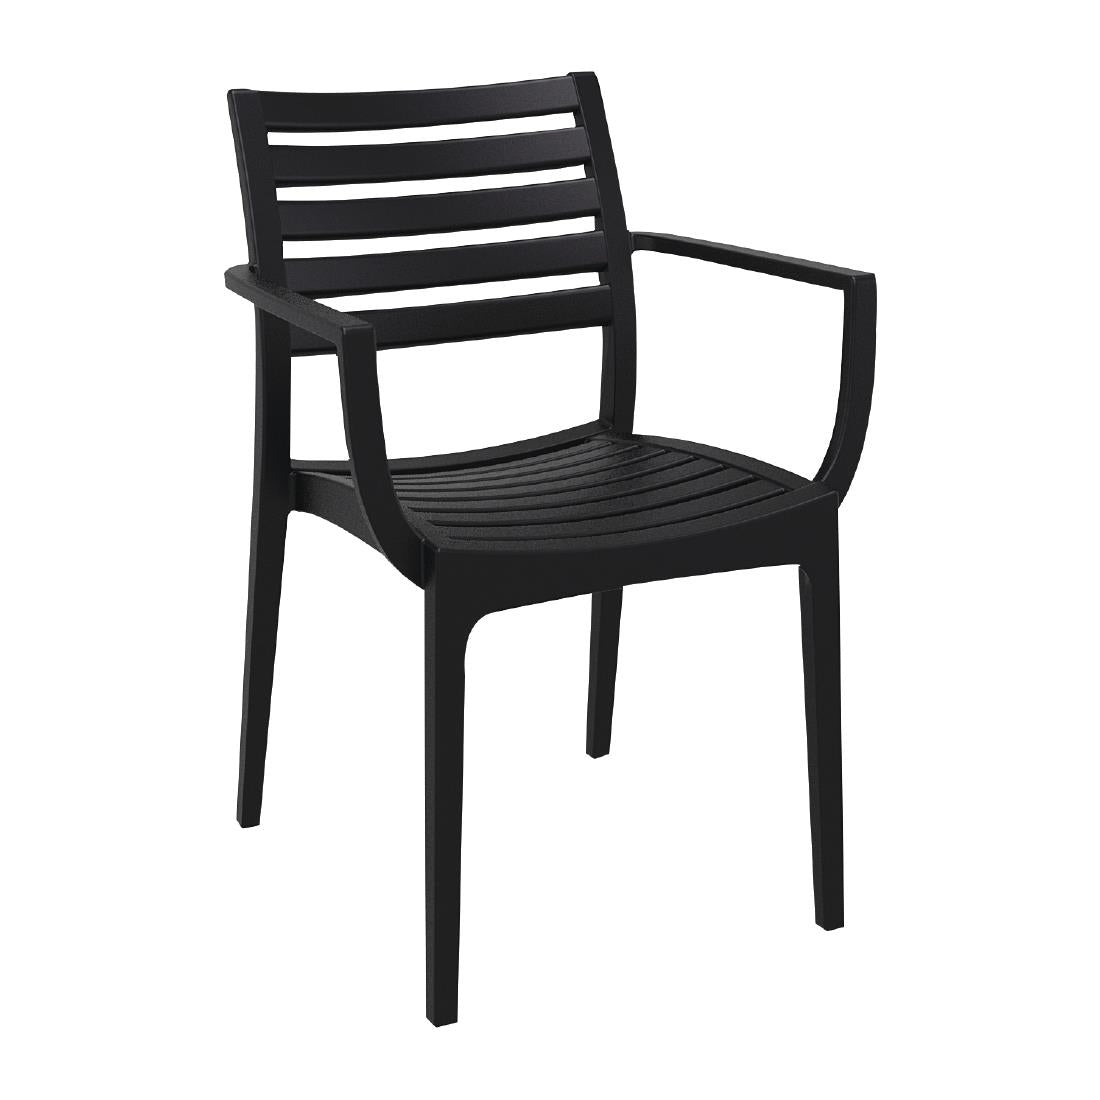 FS445 Artemis Arm Chair Black (Pack of 2) JD Catering Equipment Solutions Ltd